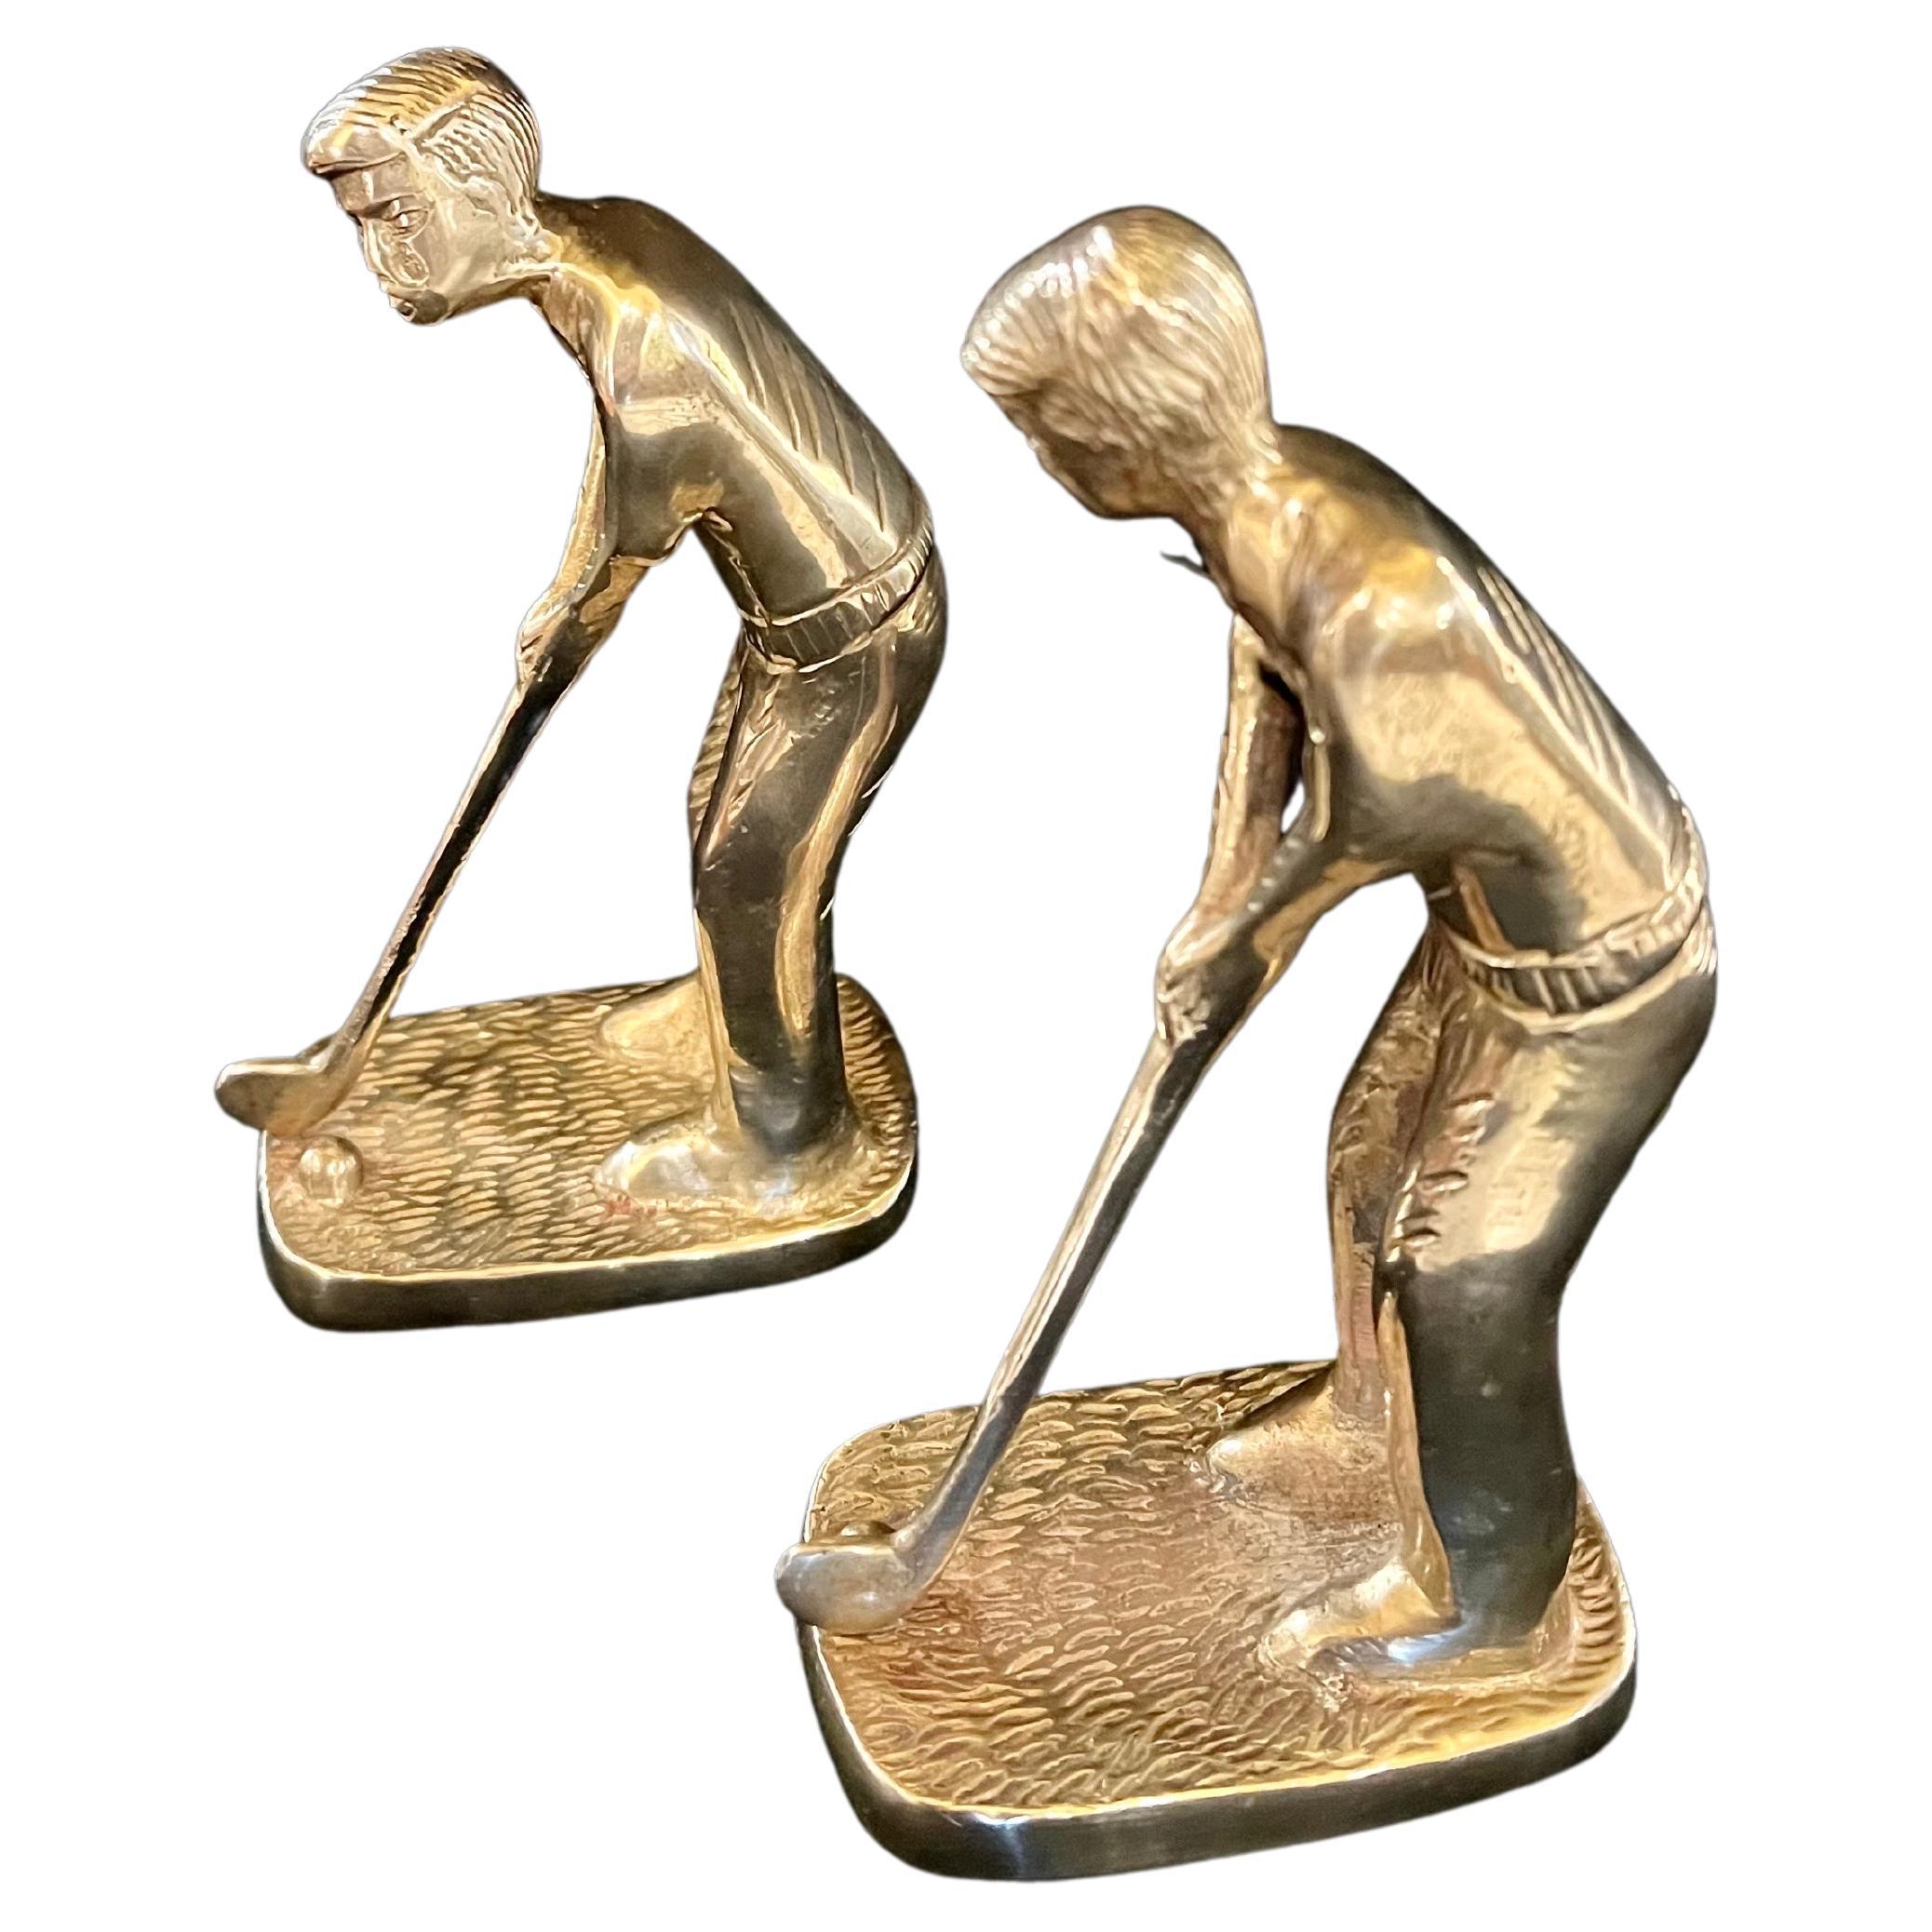 A nice pair of polished brass American Golfers bookends a nice patina.